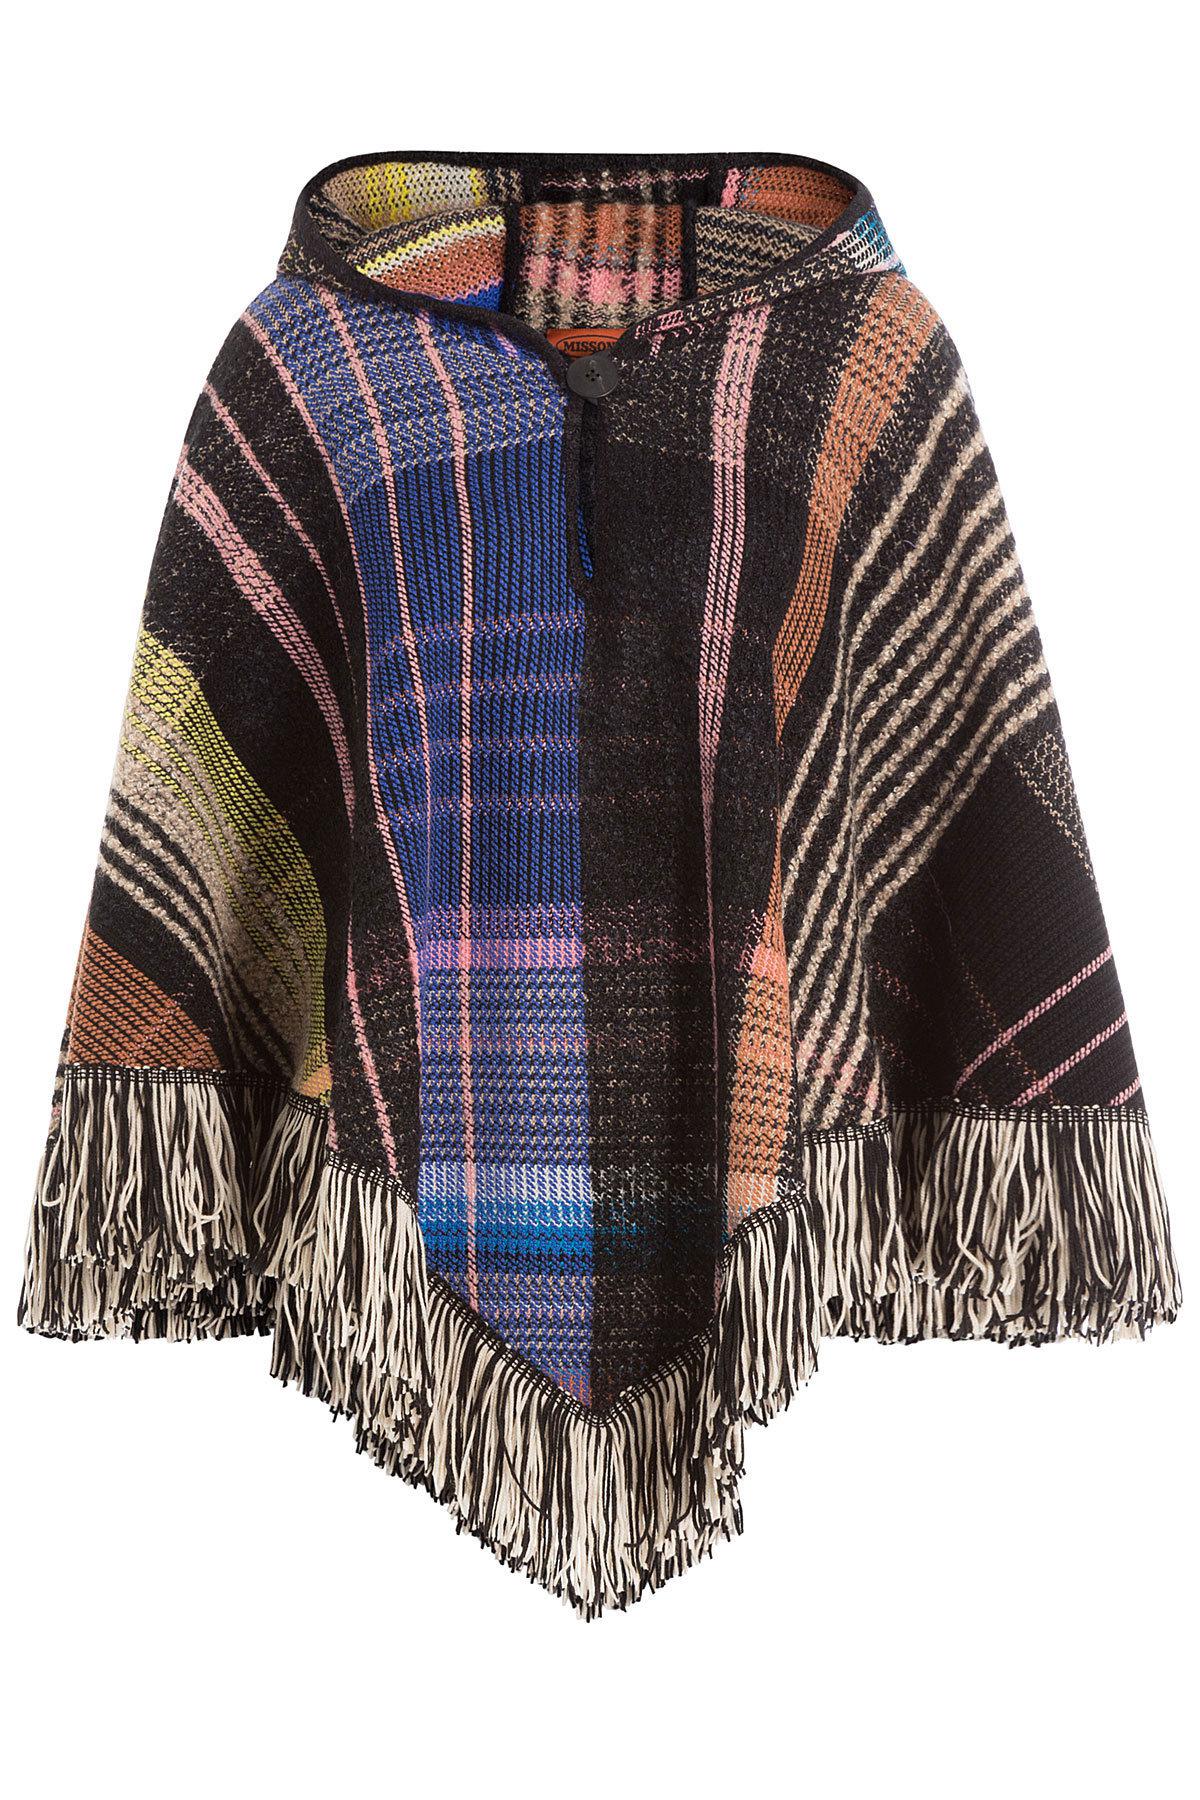 Missoni Hooded Wool Poncho With Alpaca, Mohair And Silk in Blue - Lyst